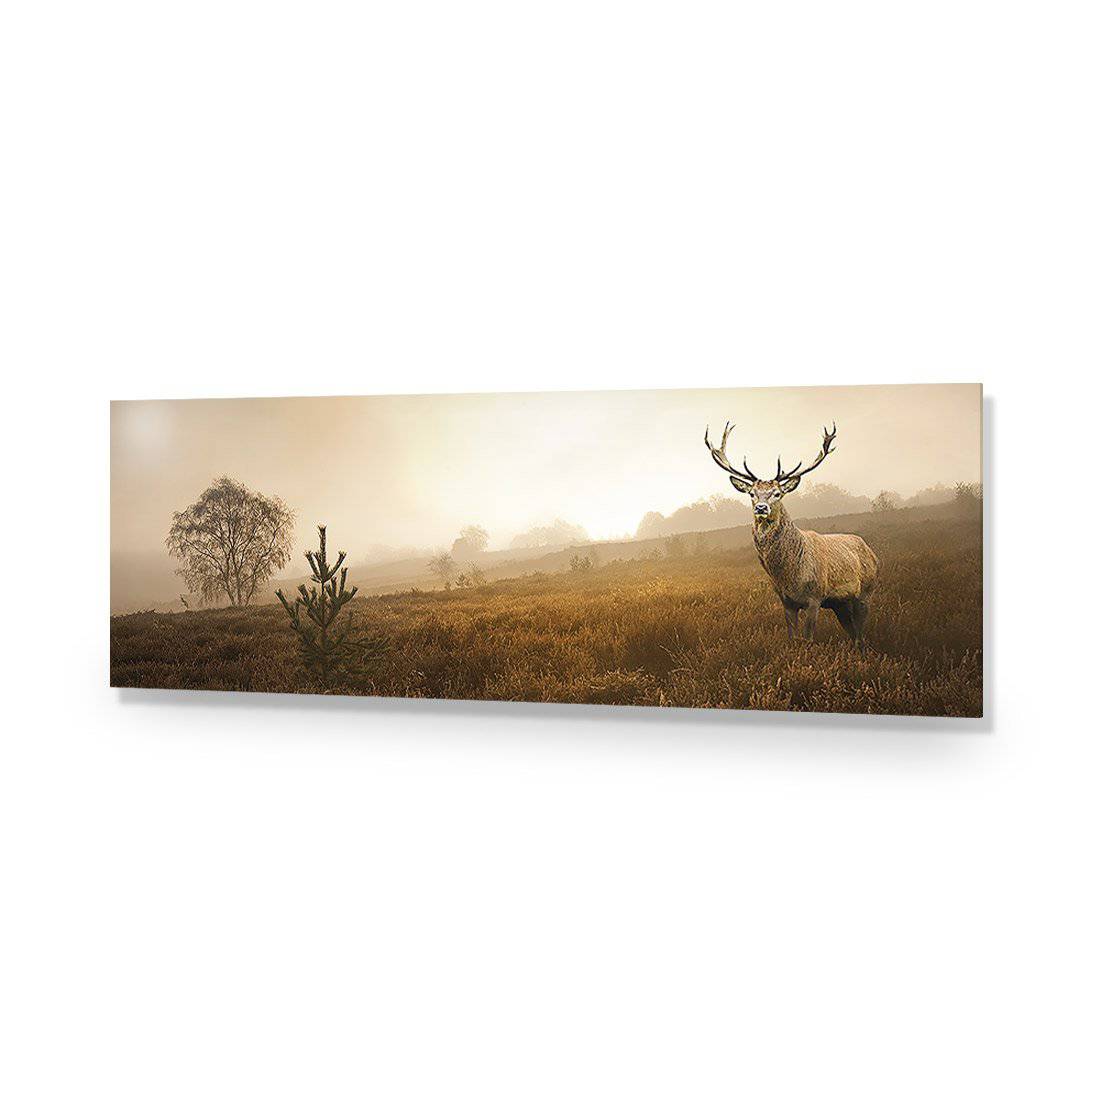 Morning Stag, Long-Acrylic-Wall Art Design-Without Border-Acrylic - No Frame-60x20cm-Wall Art Designs